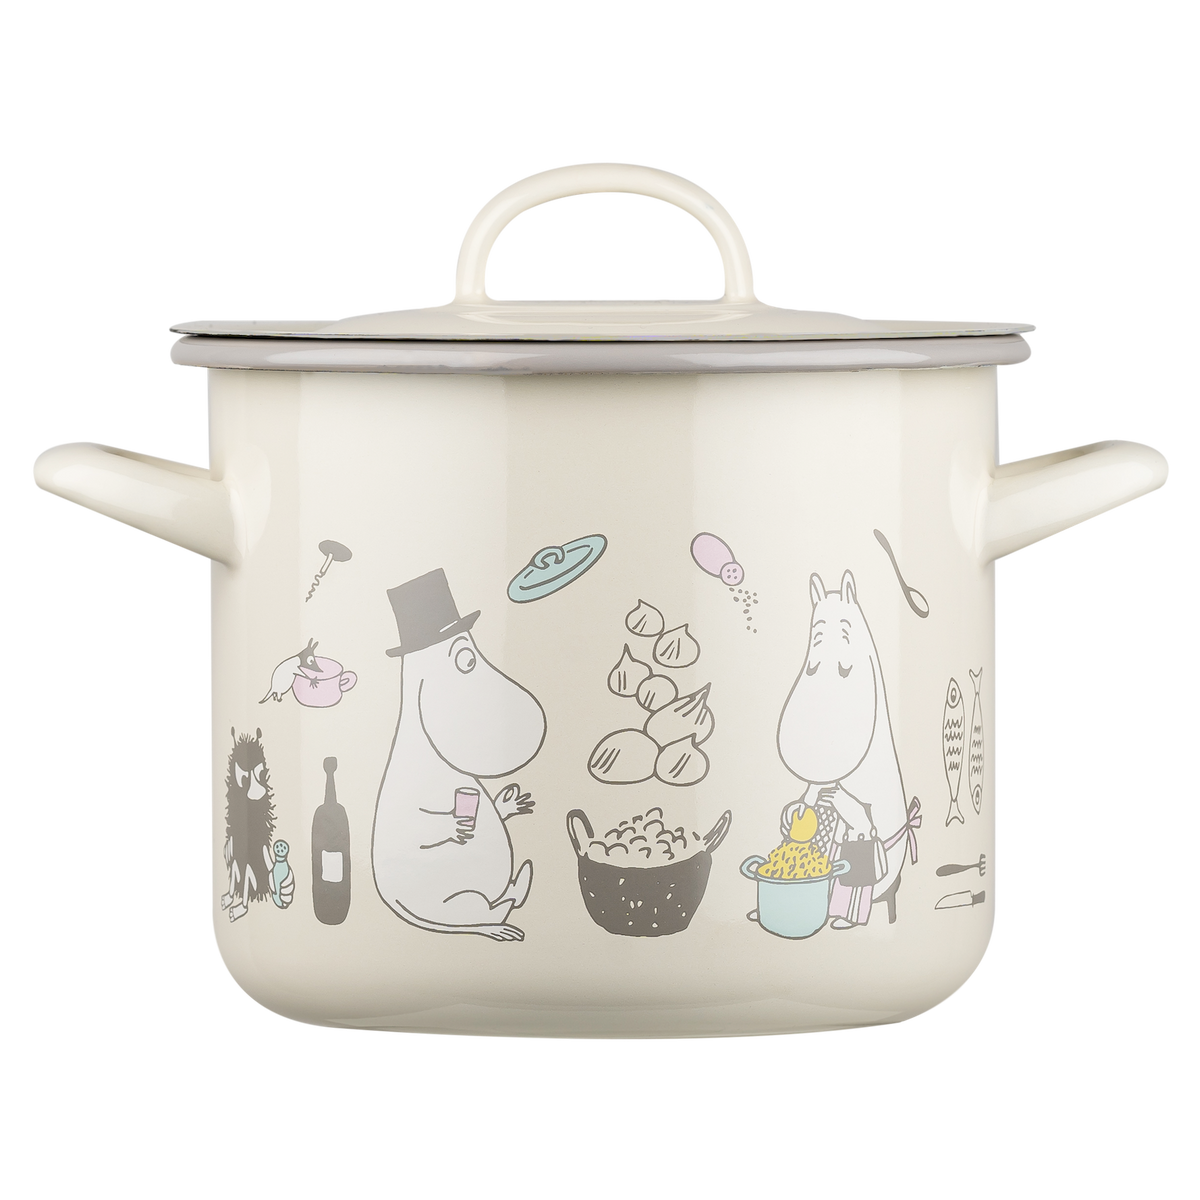 Moomin by Muurla, Bon Appétit Enamel Cooking Pot with Lid, 2.5 L, made in carbon steel enamelware 1719-250-01 